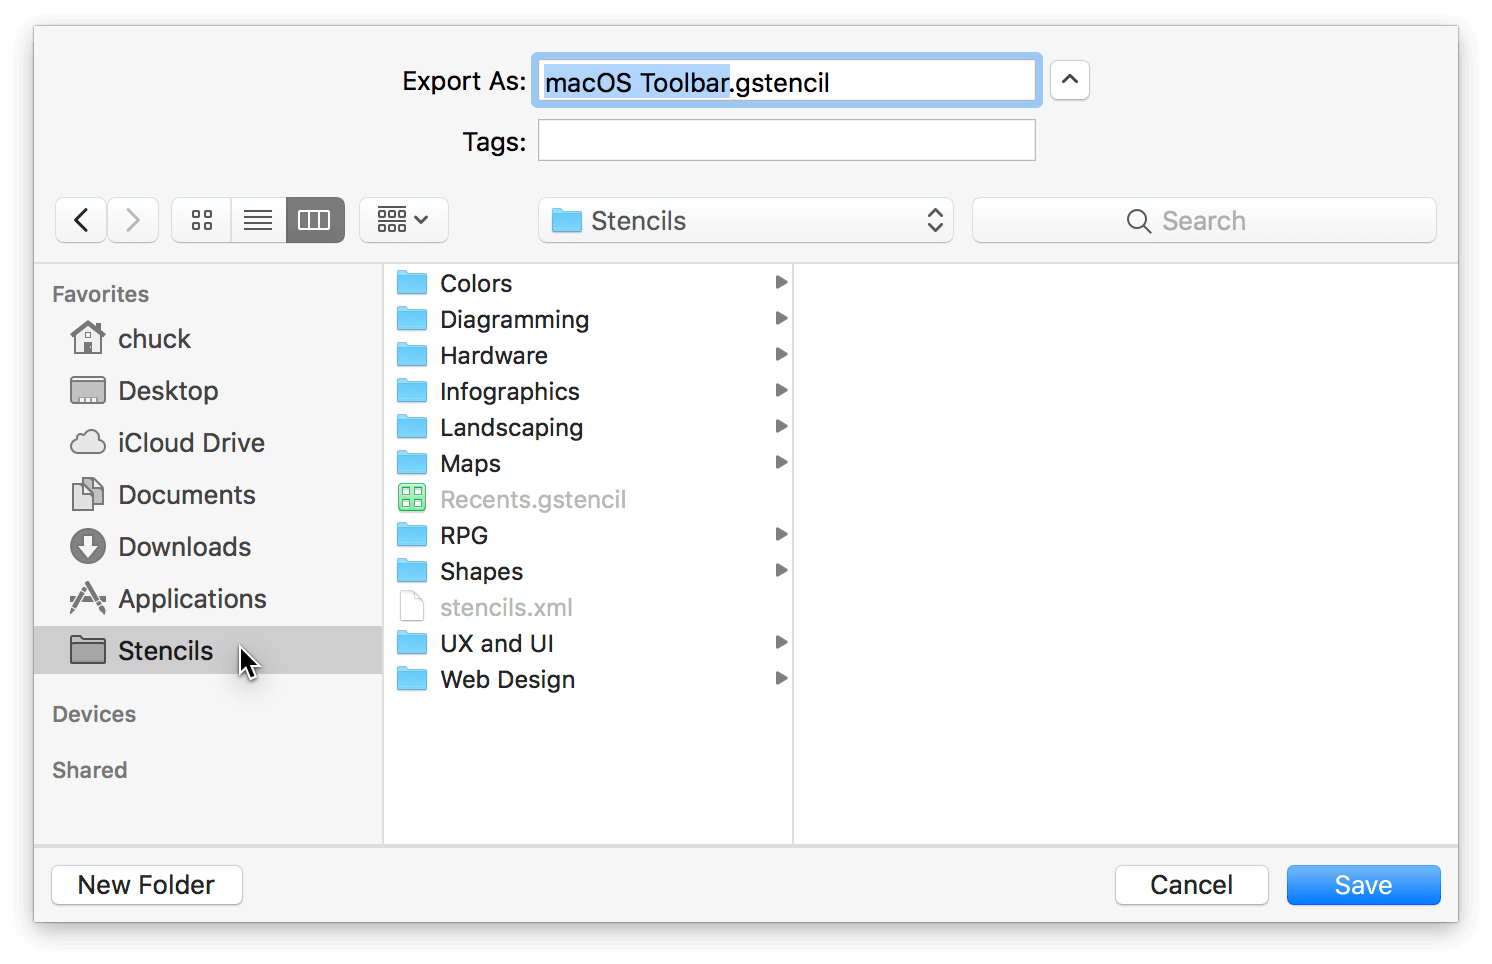 An Export sheet shows the Stencils folder in the Favorites list in the left sidebar.